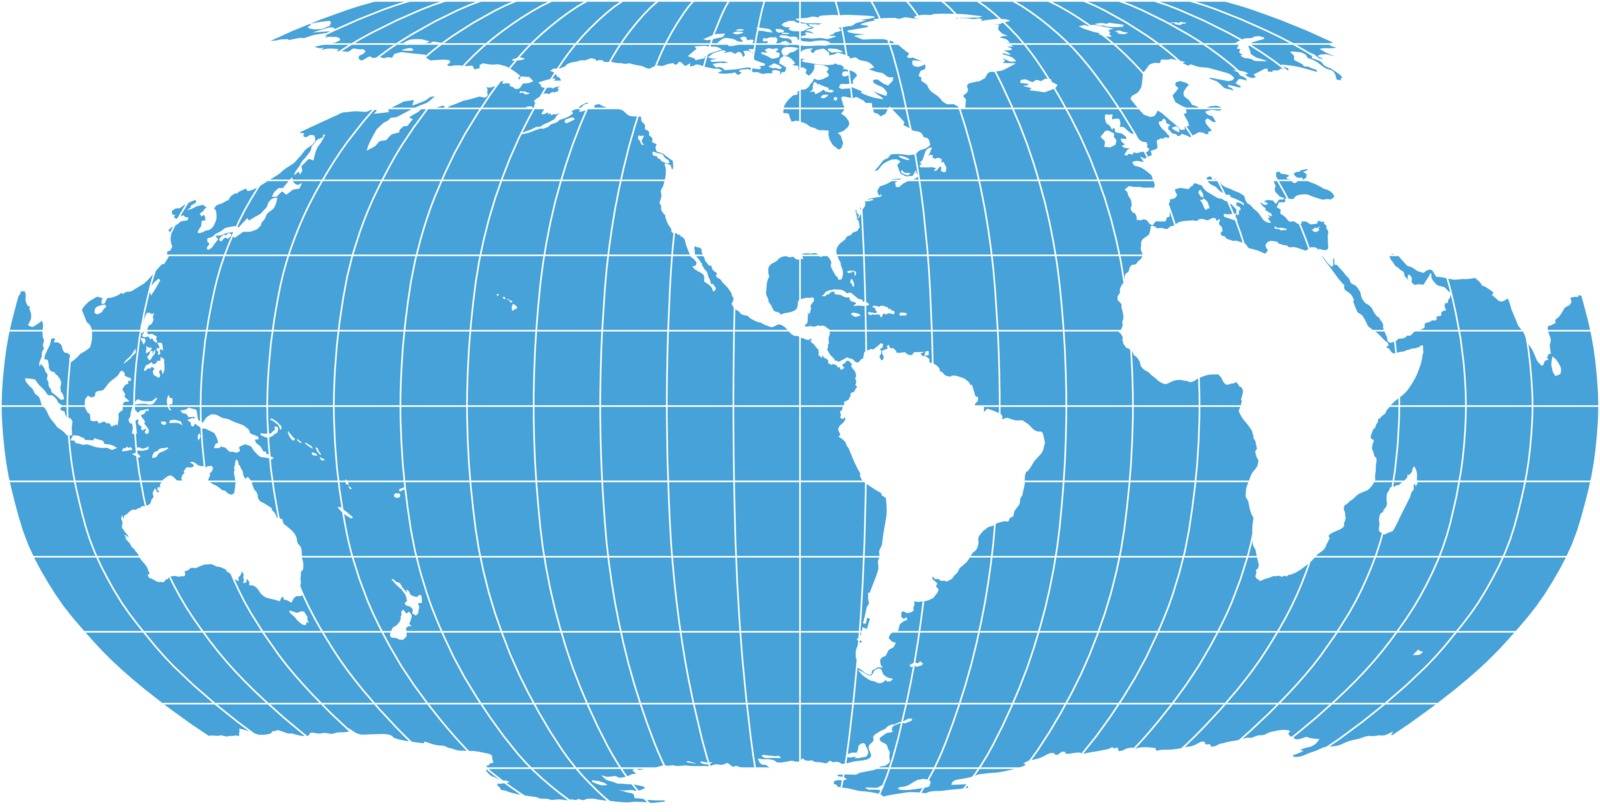 World Map in Robinson Projection with meridians and parallels grid. Americas centered. White land and blue sea. Vector illustration.